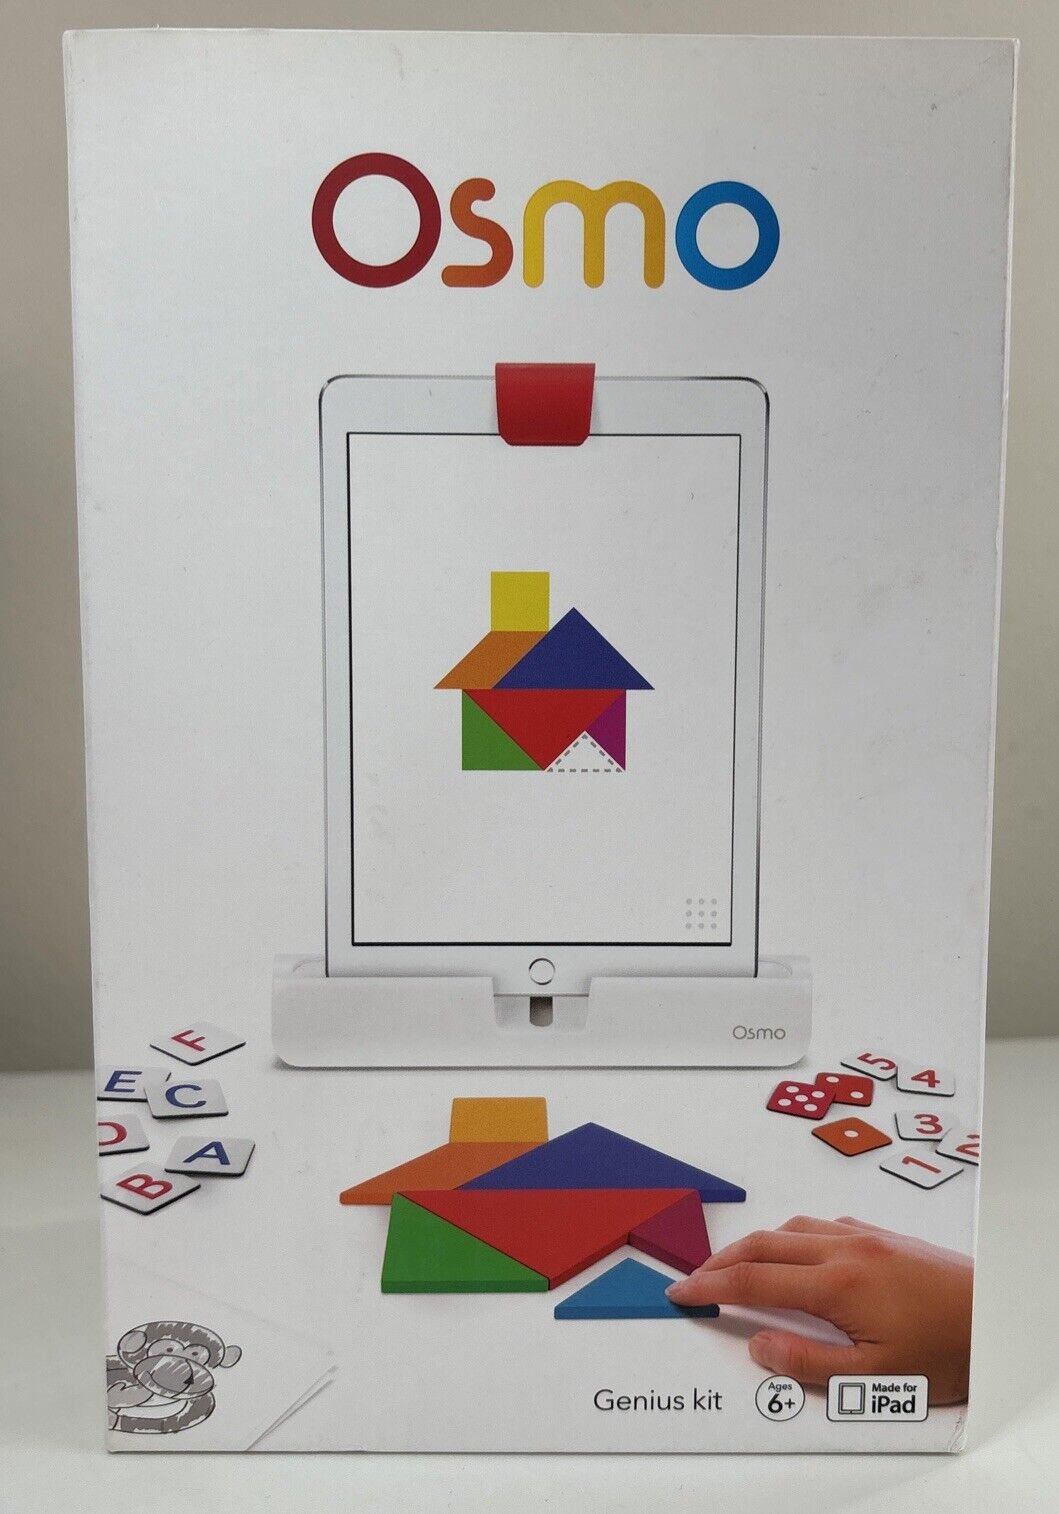 Brand New Sealed Osmo Genius Kit Learning System for iPad Tablet Ages 6+